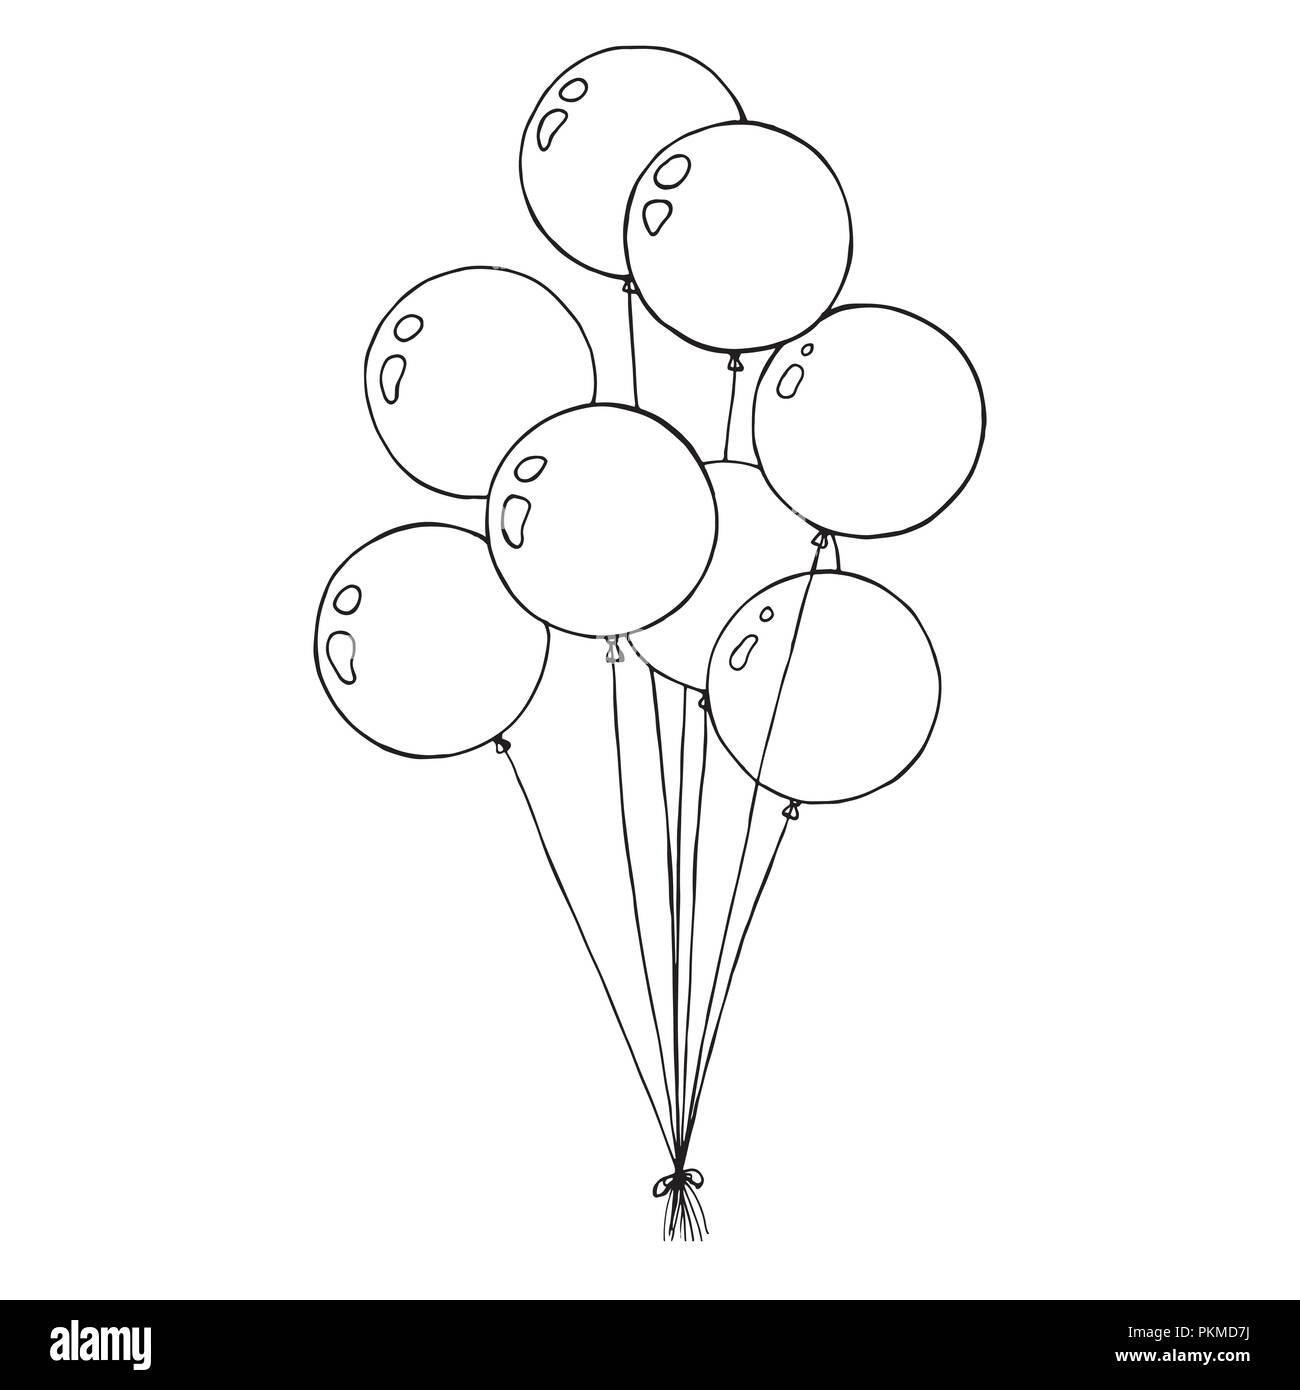 https://c8.alamy.com/comp/PKMD7J/group-of-balloons-on-a-string-hand-drawn-isolated-on-a-white-background-vector-illustration-PKMD7J.jpg